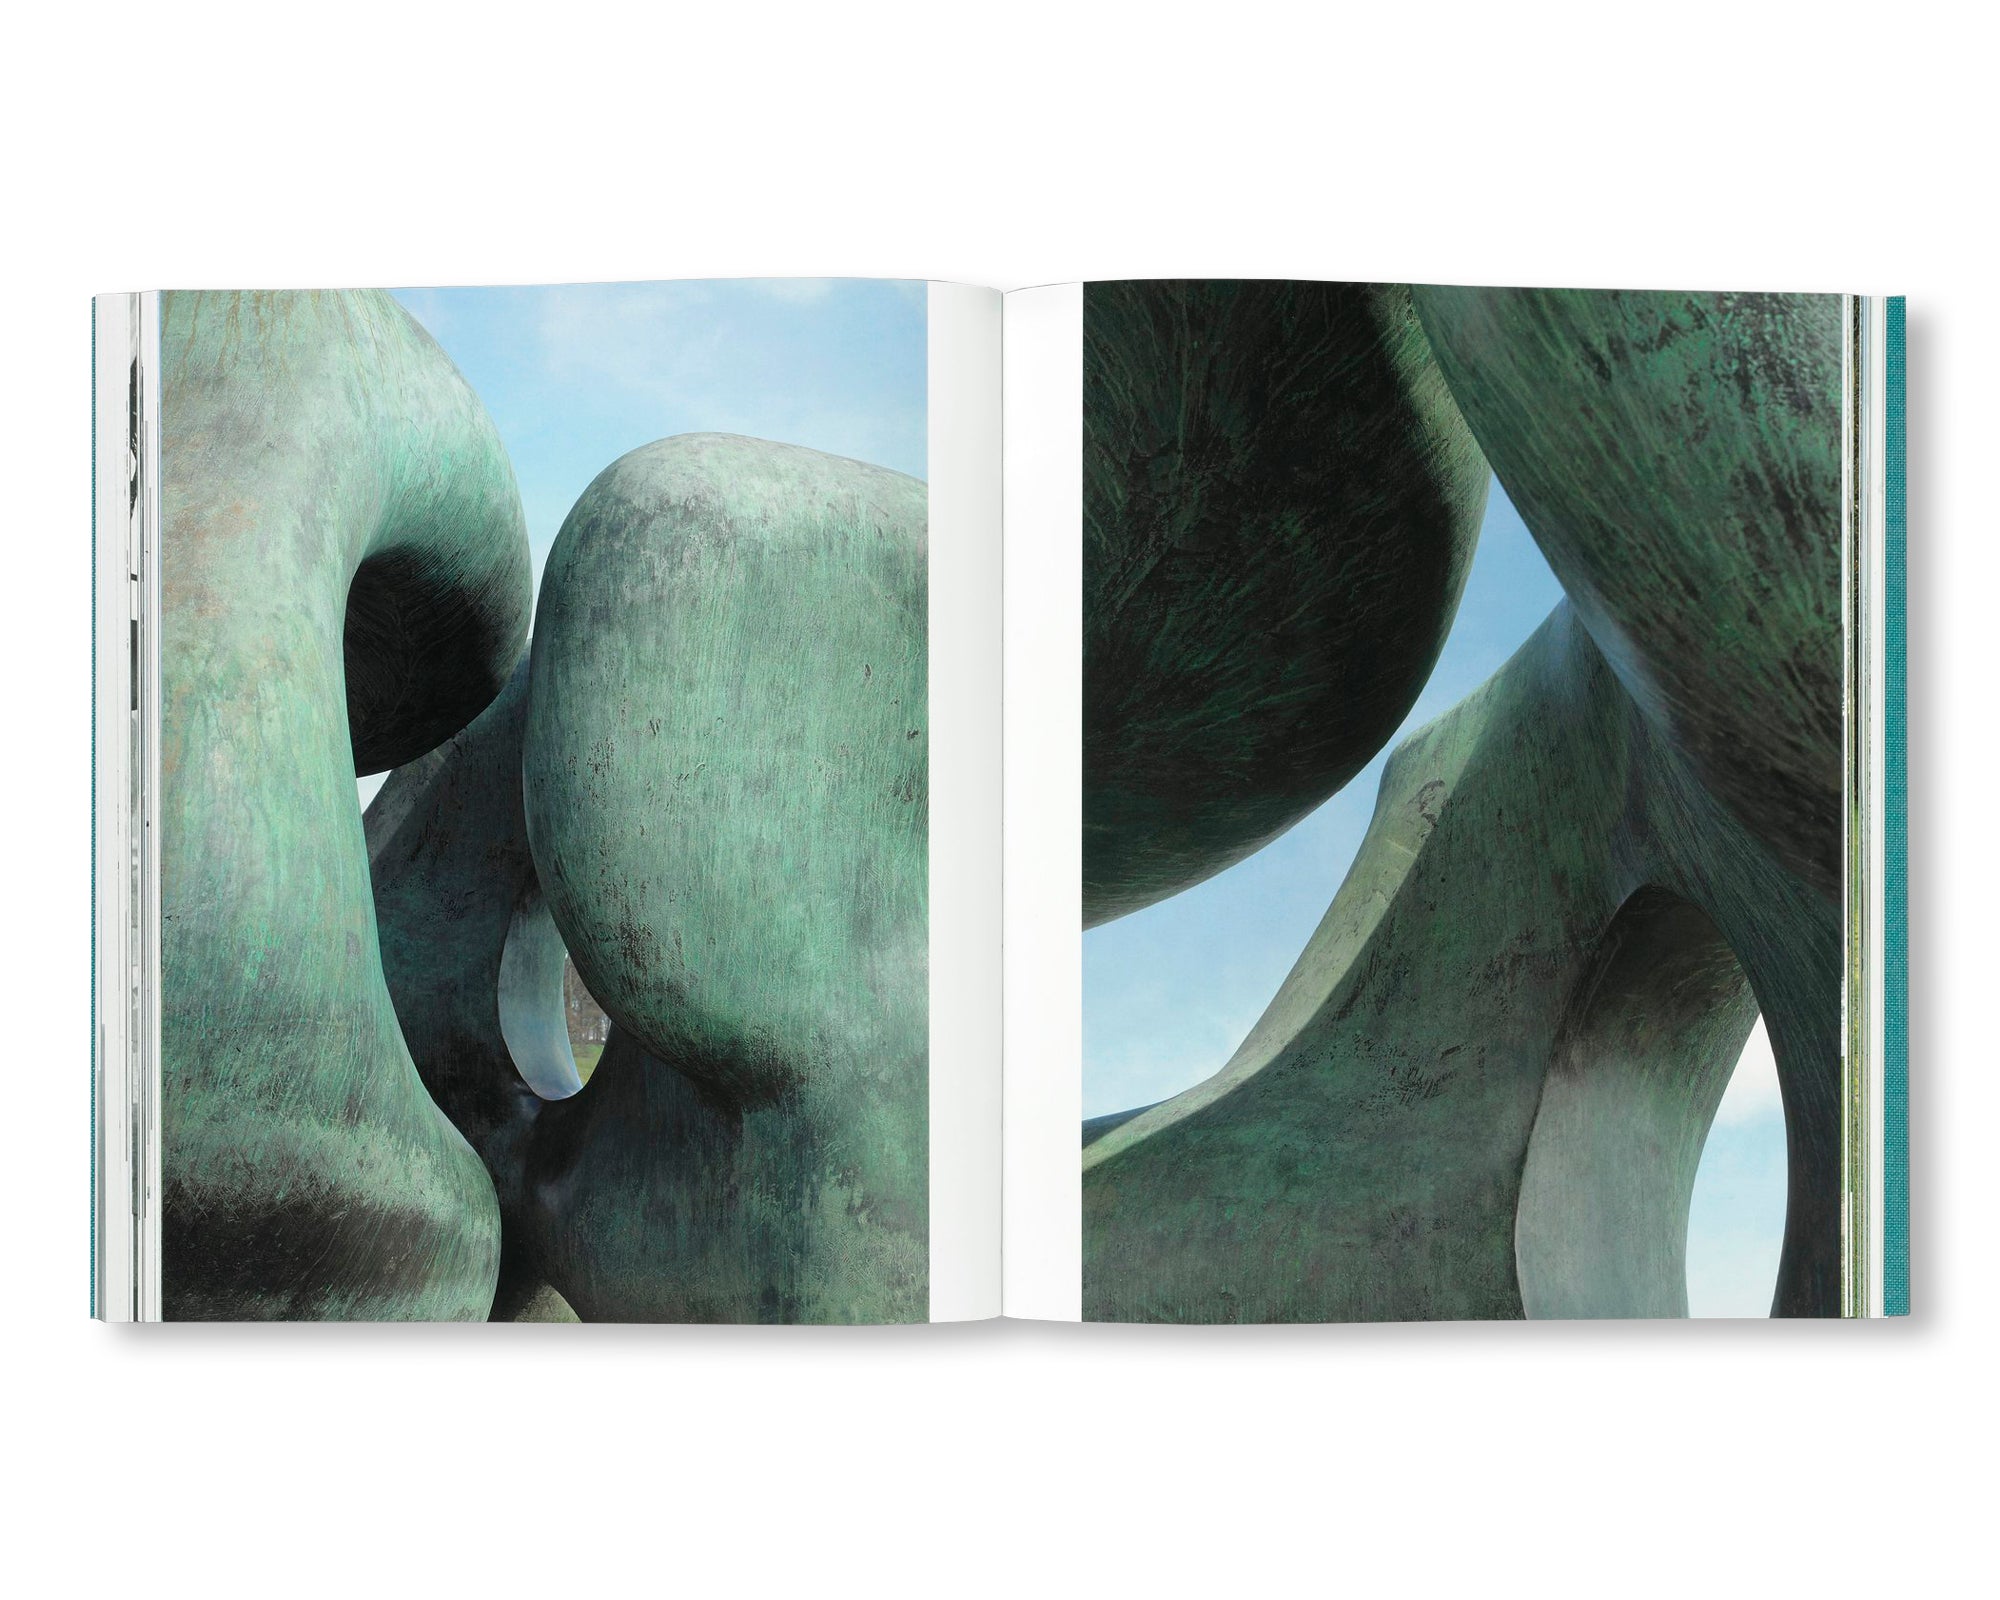 LATE LARGE FORMS by Henry Moore